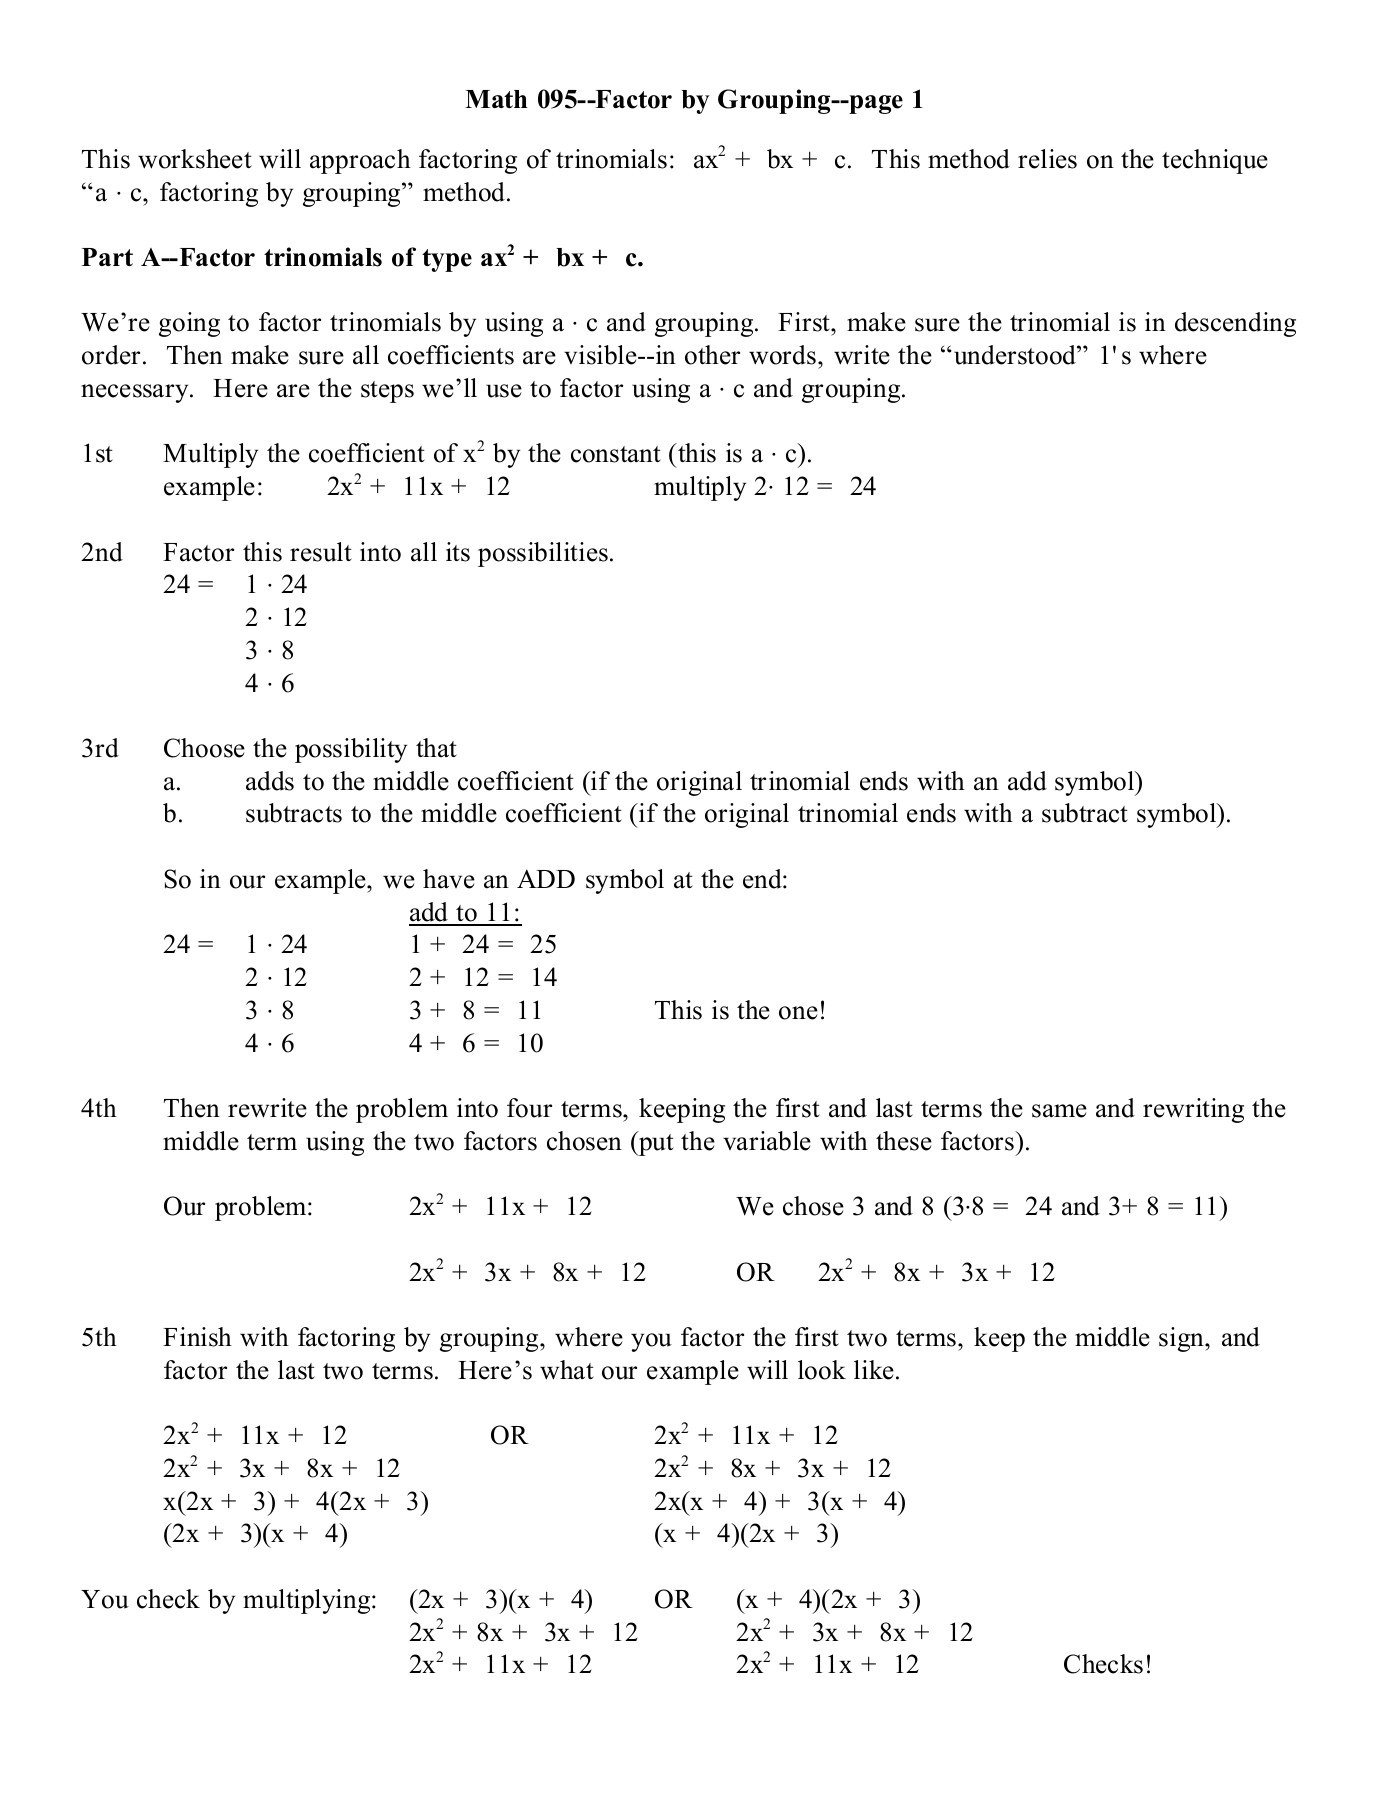 Factoring by Grouping Worksheet Answers 7 5 Math 095 Factor by Grouping Page 1 Csn Pages 1